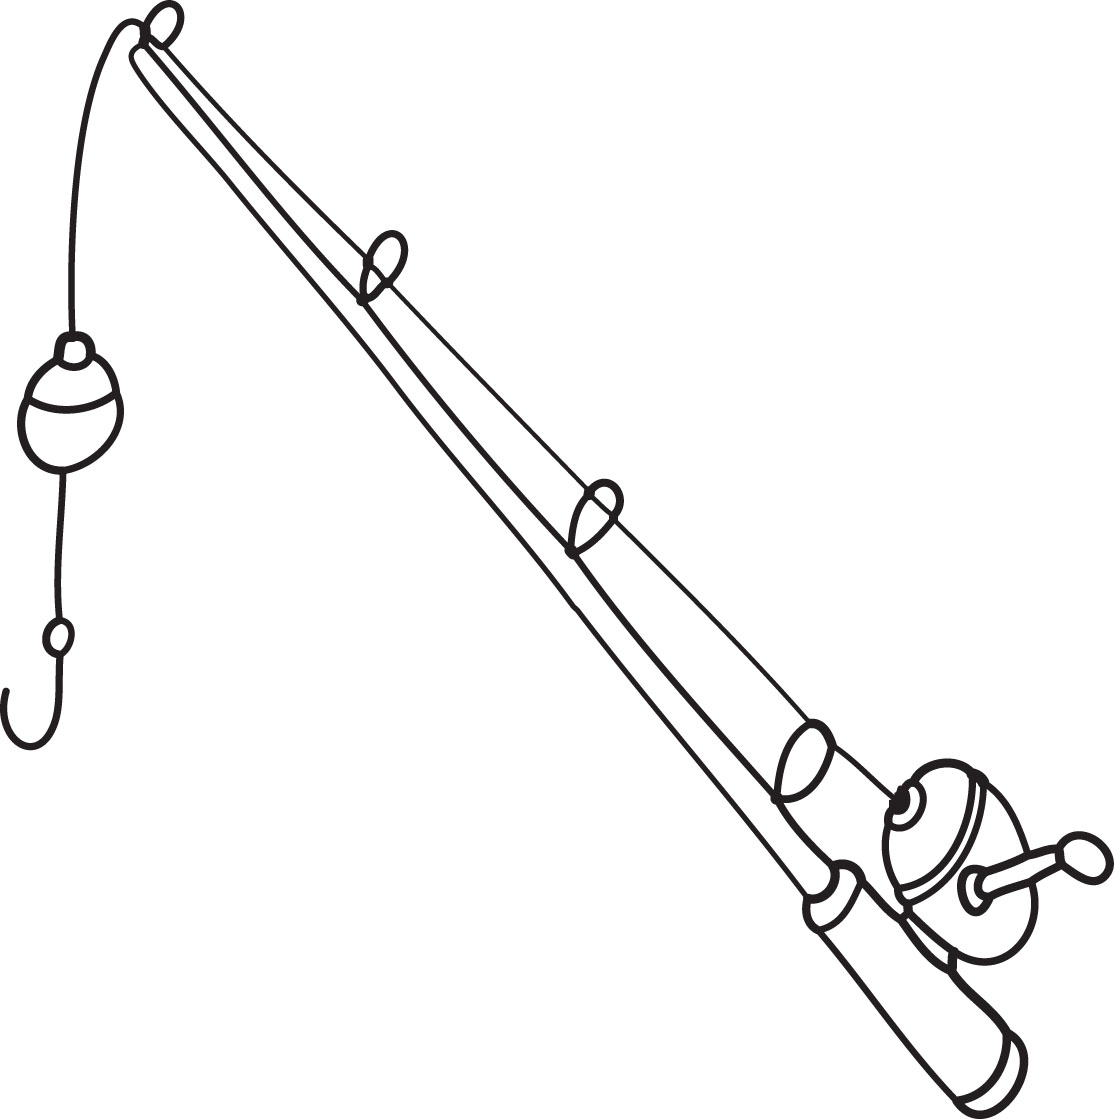 fishing pole with fish clipar